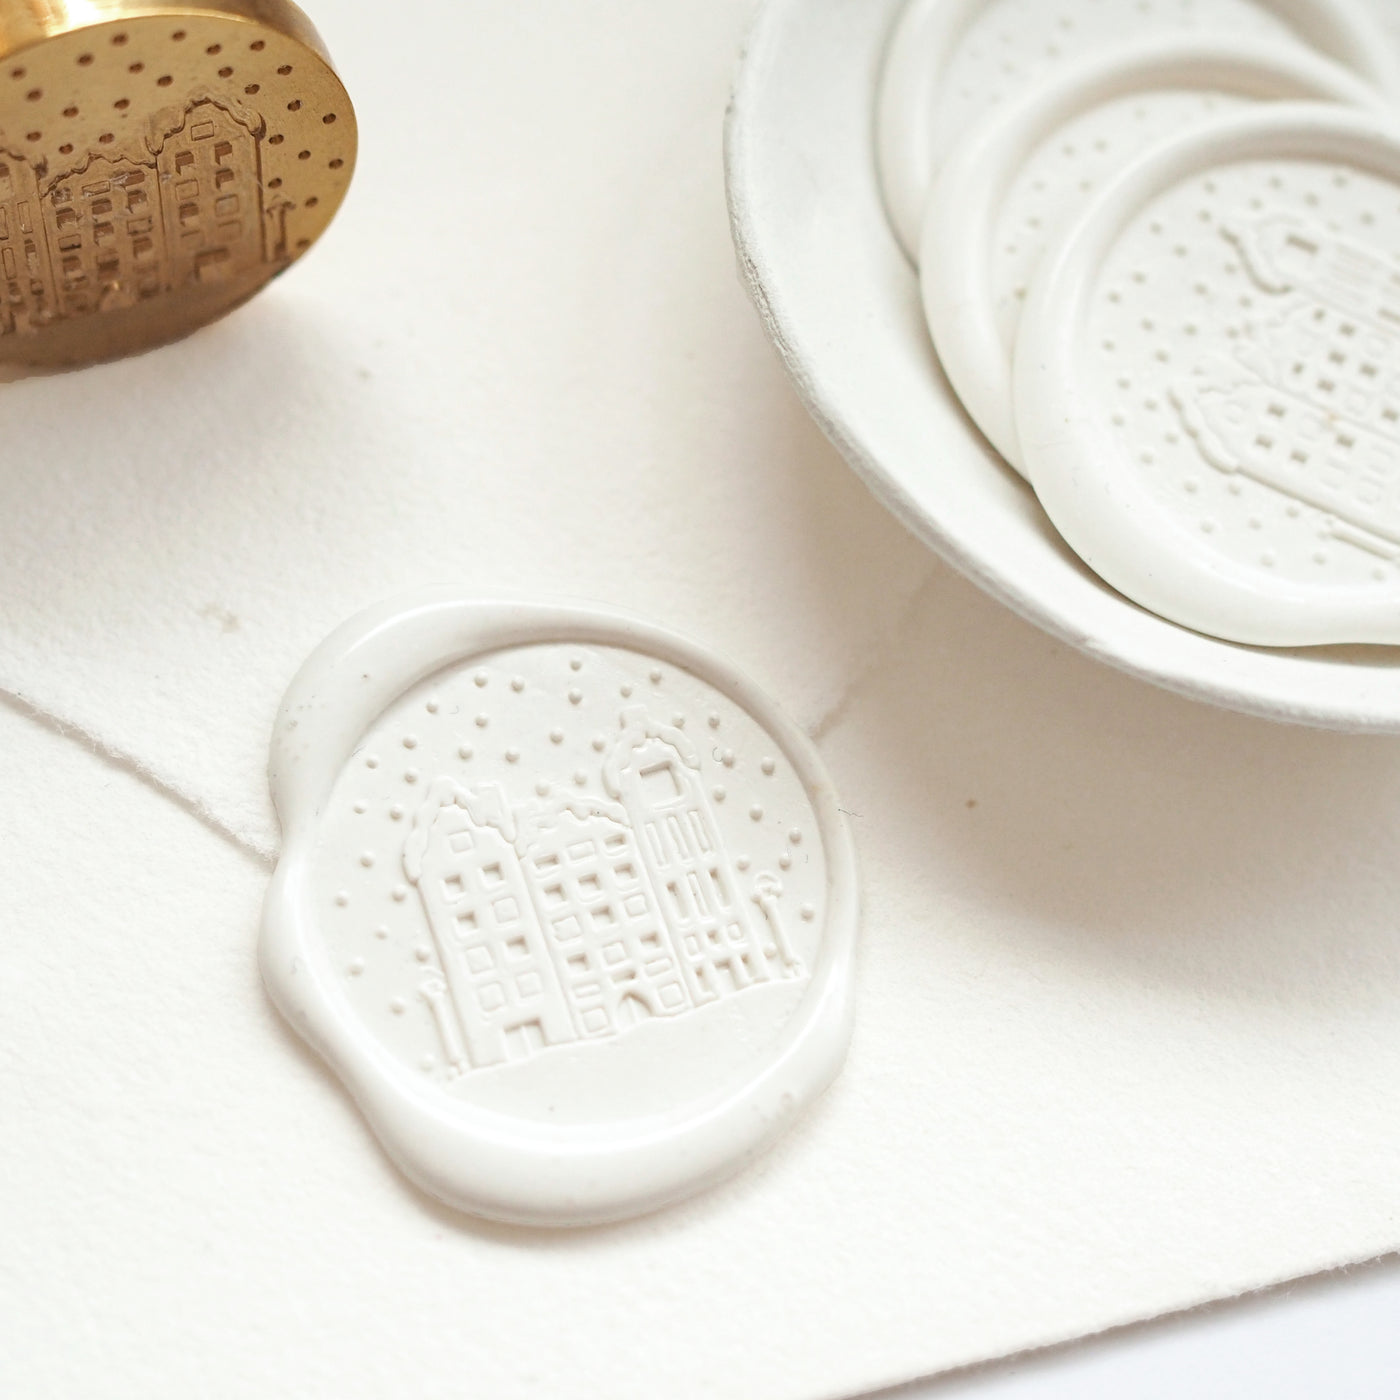 SNOWY VILLAGE WAX SEAL STAMP - 'BELIEVE' CHRISTMAS COLLECTION